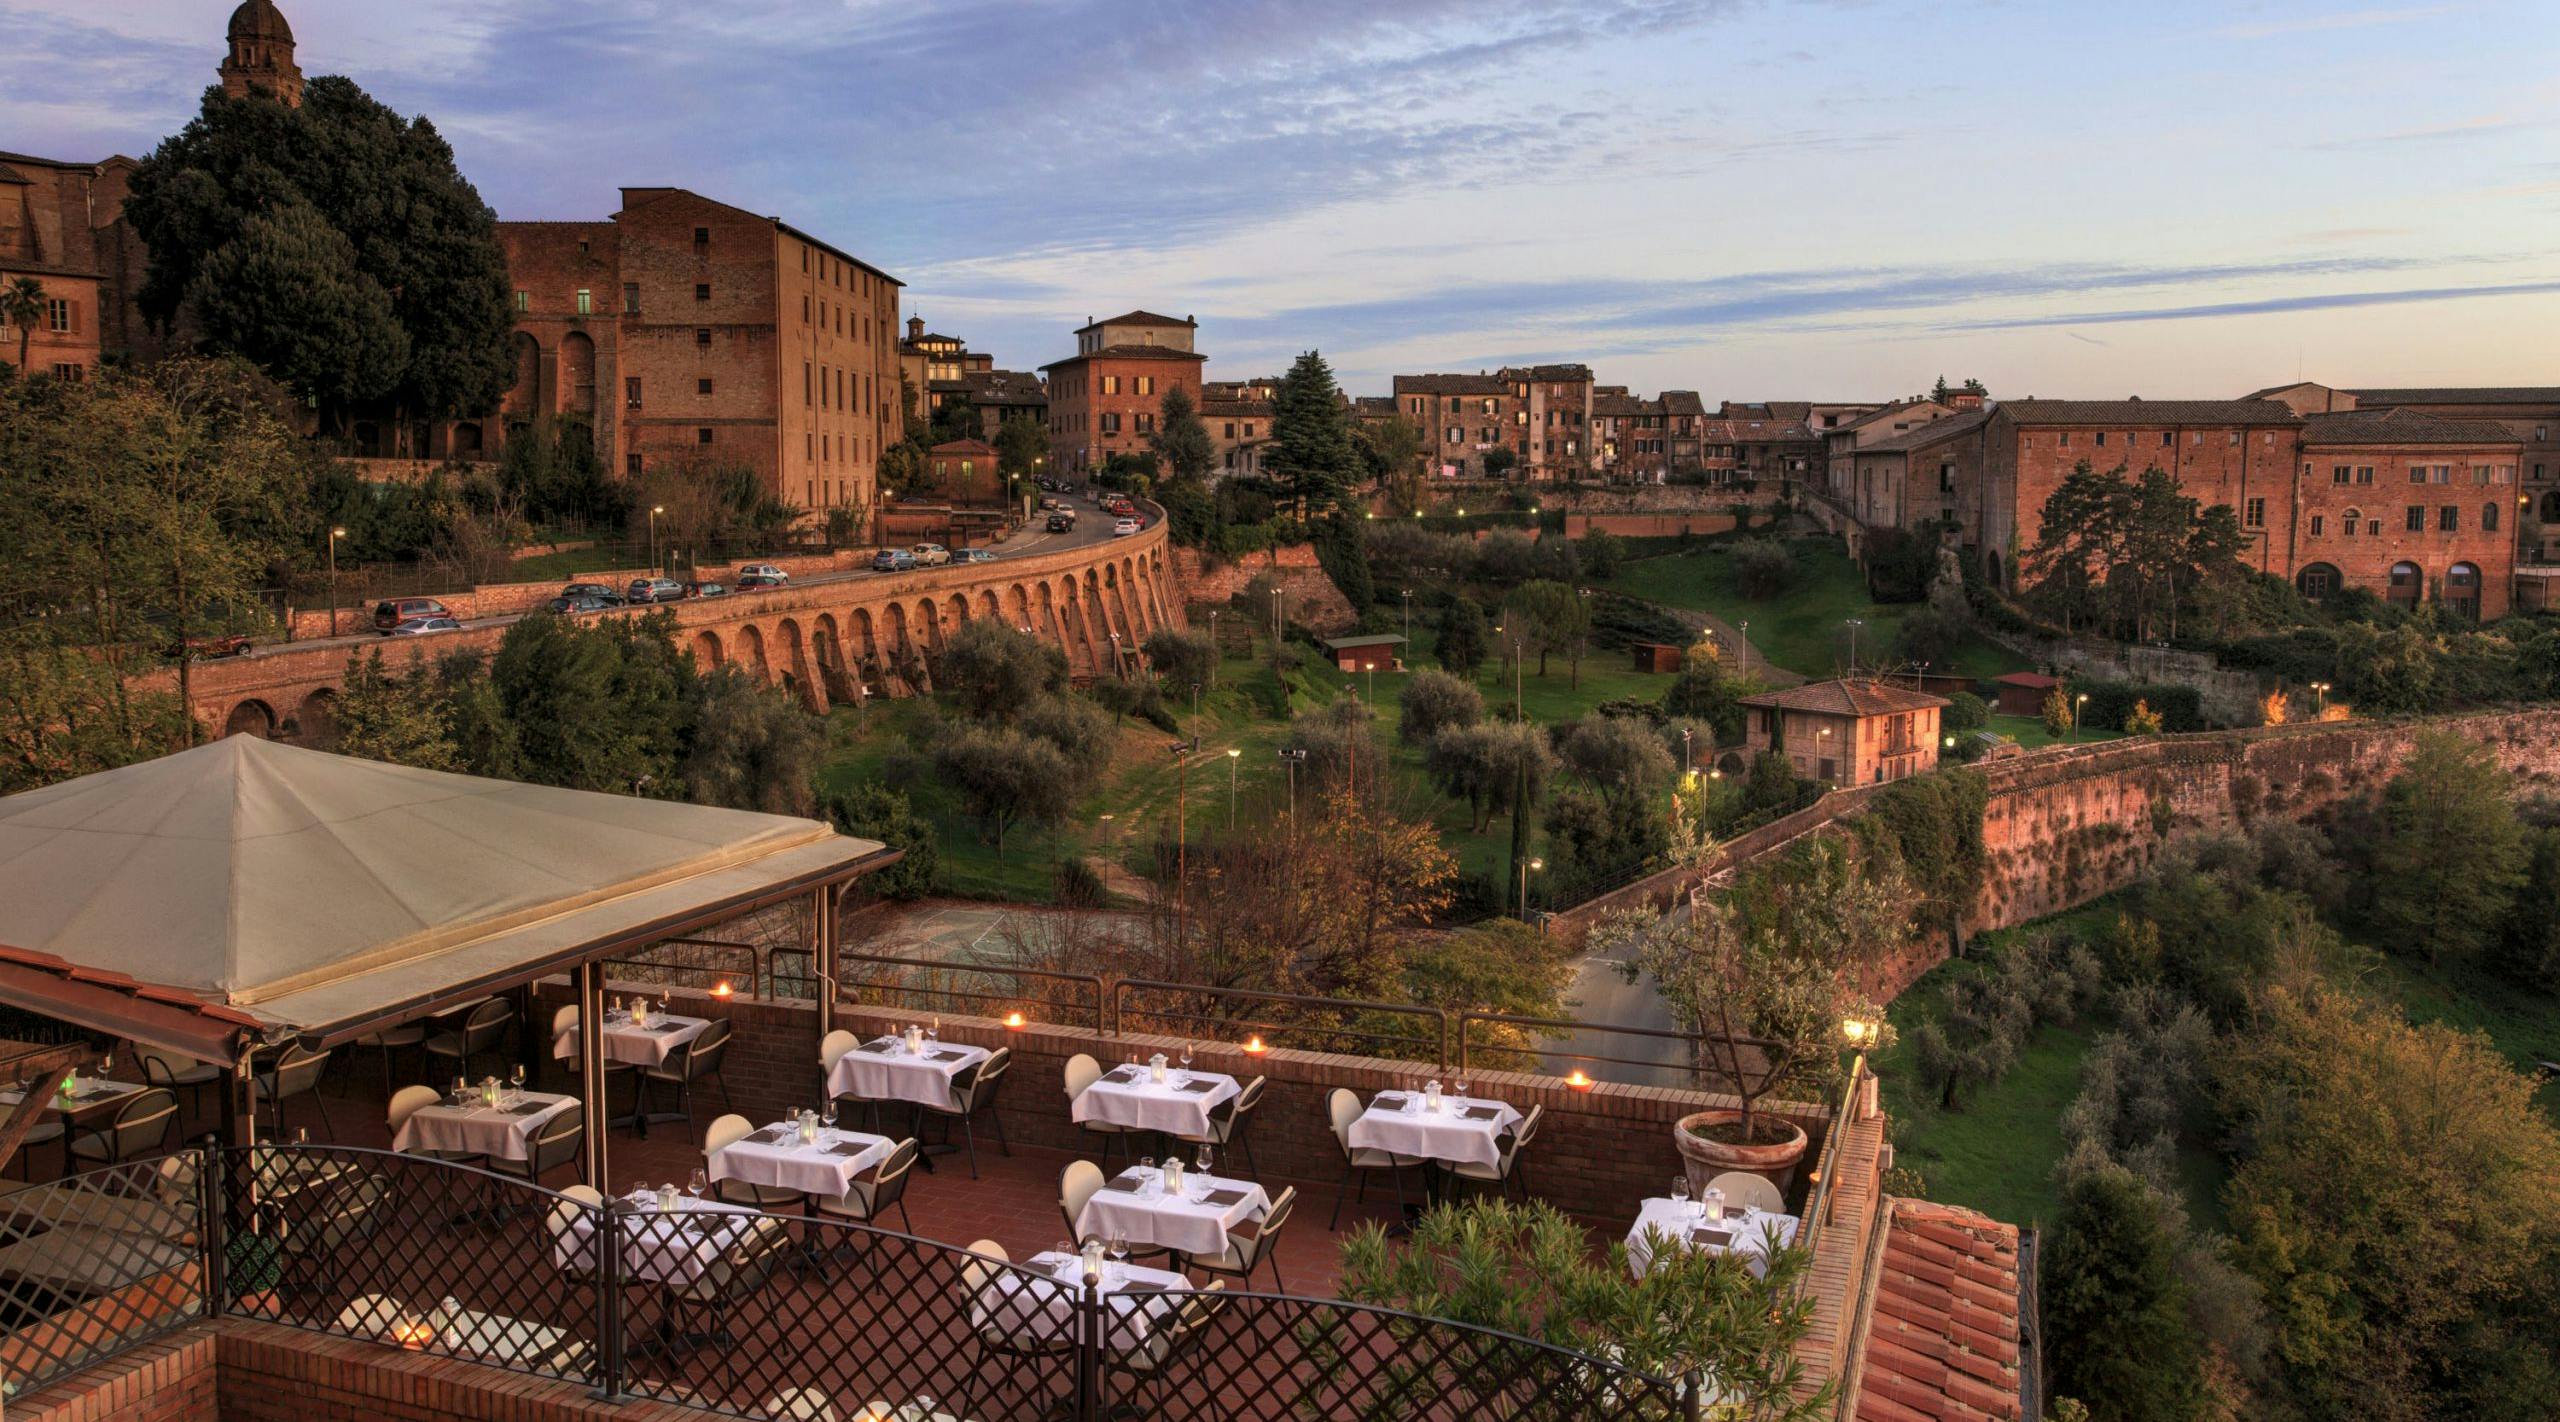 Hotel Mice with terraces on the Terre di Siena